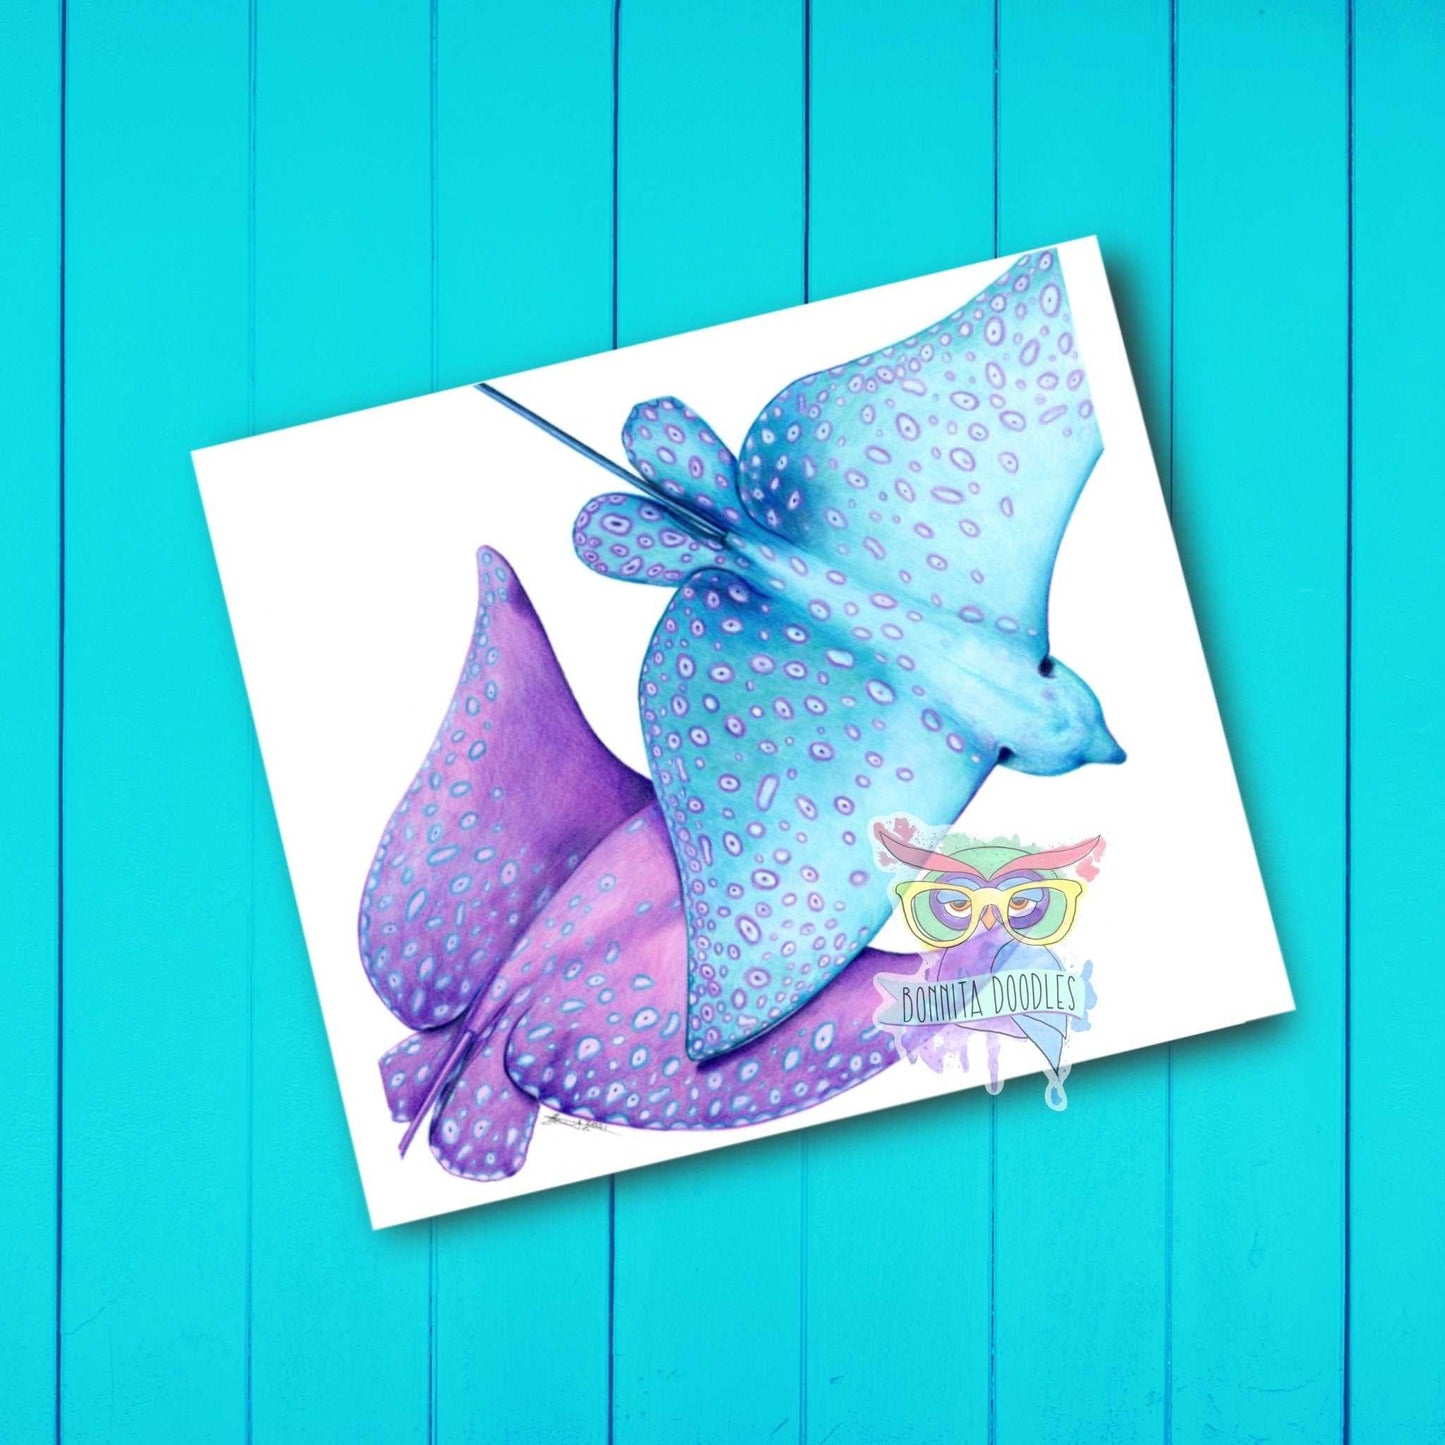 Spotted Eagle Rays - Original drawing